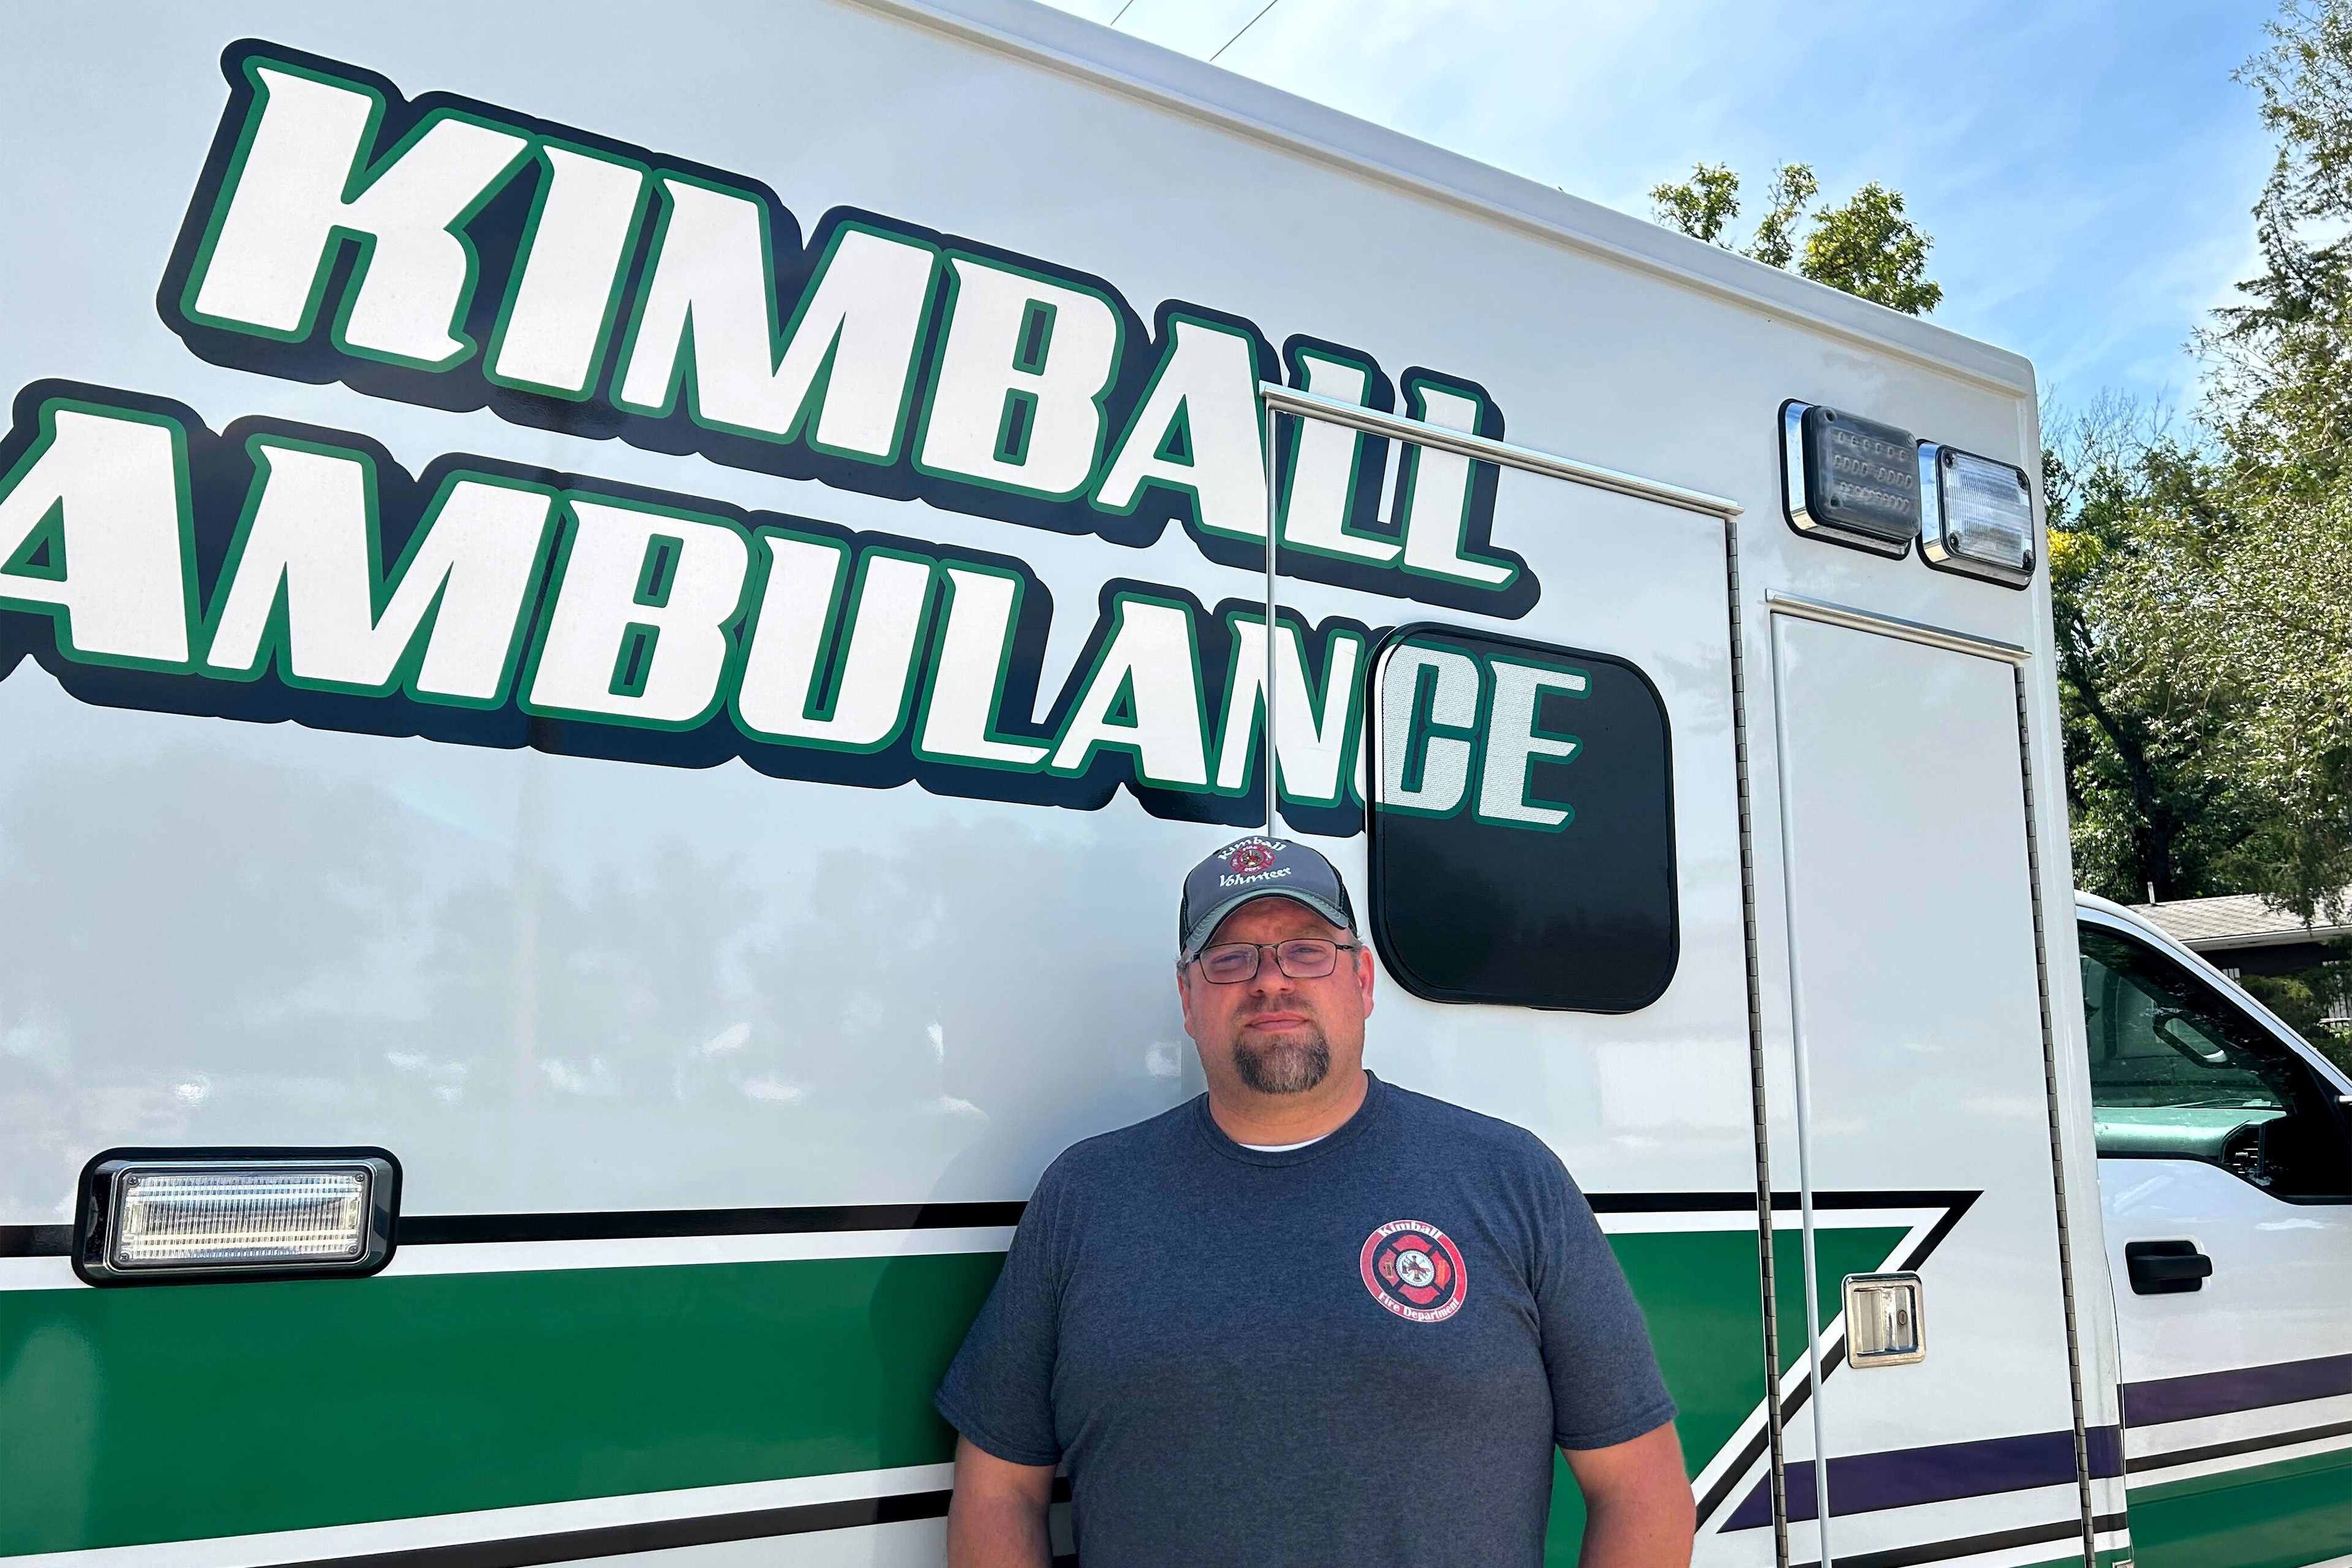 A man wearing a cap stands in front of an ambulance painted with "Kimball Ambulance" on the side.